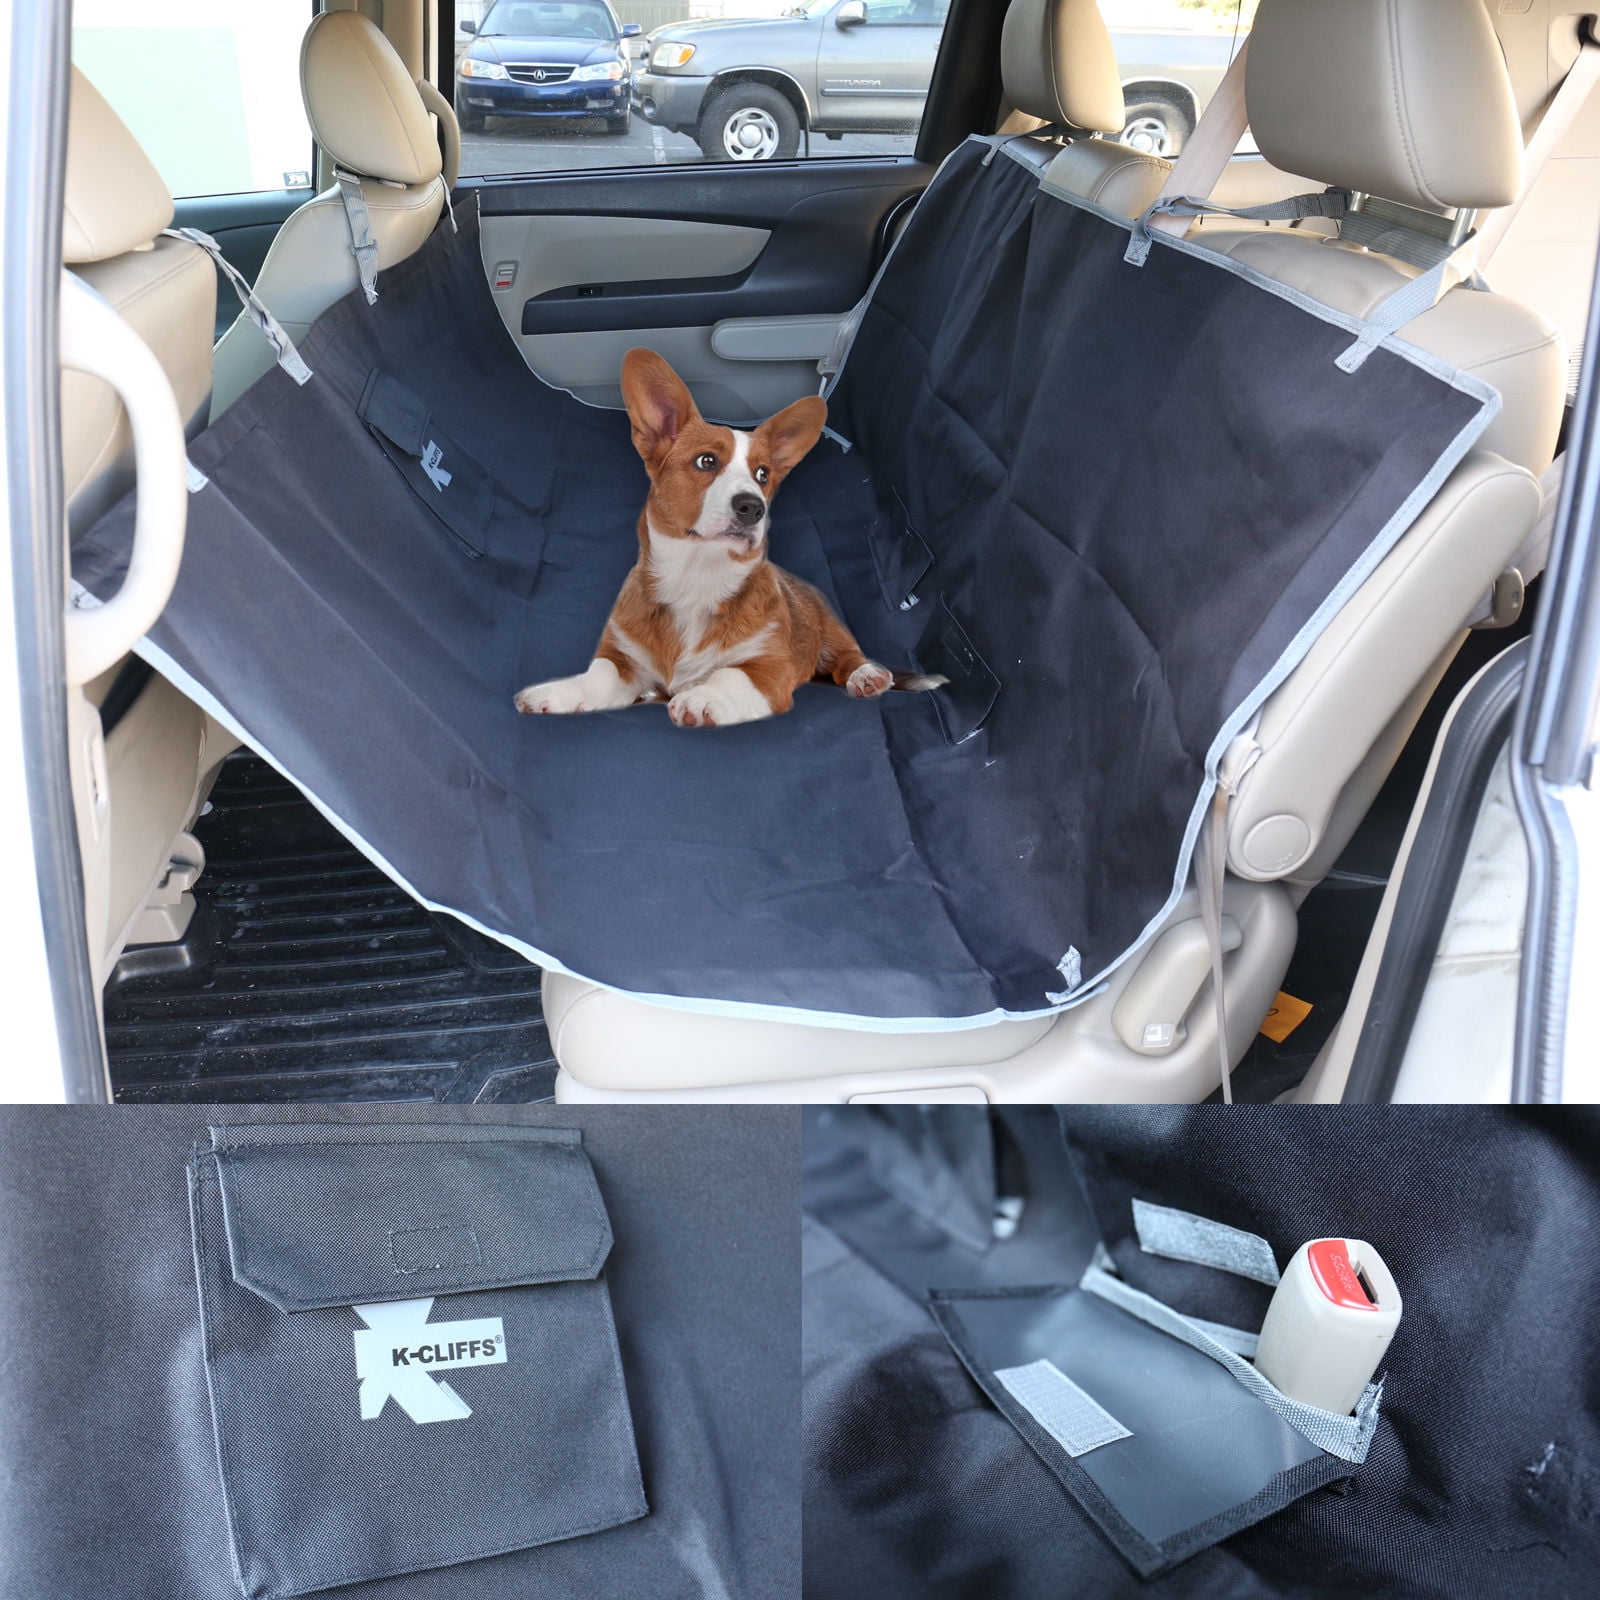 Ktaxon Dog Car Seat Cover Cars Protector, w/Extra Side Flaps, Seat 